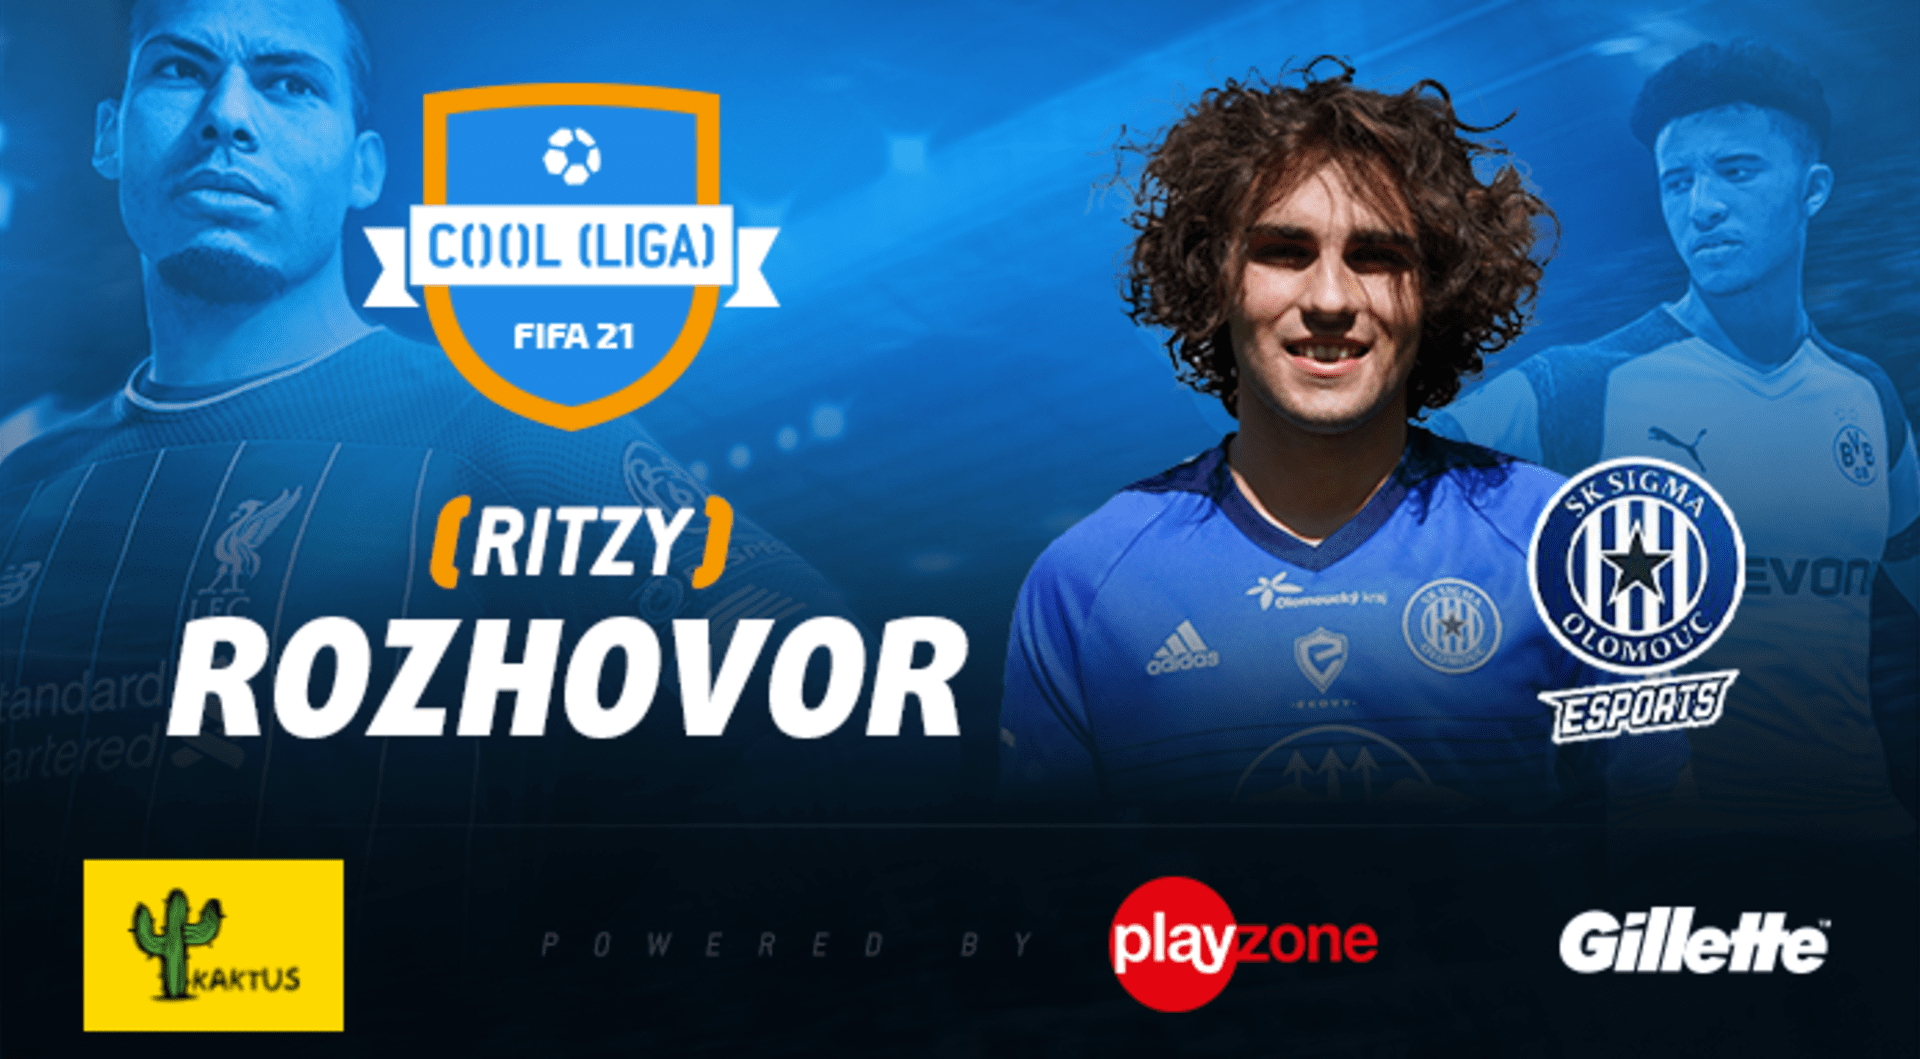 Ritzy, rozhovor